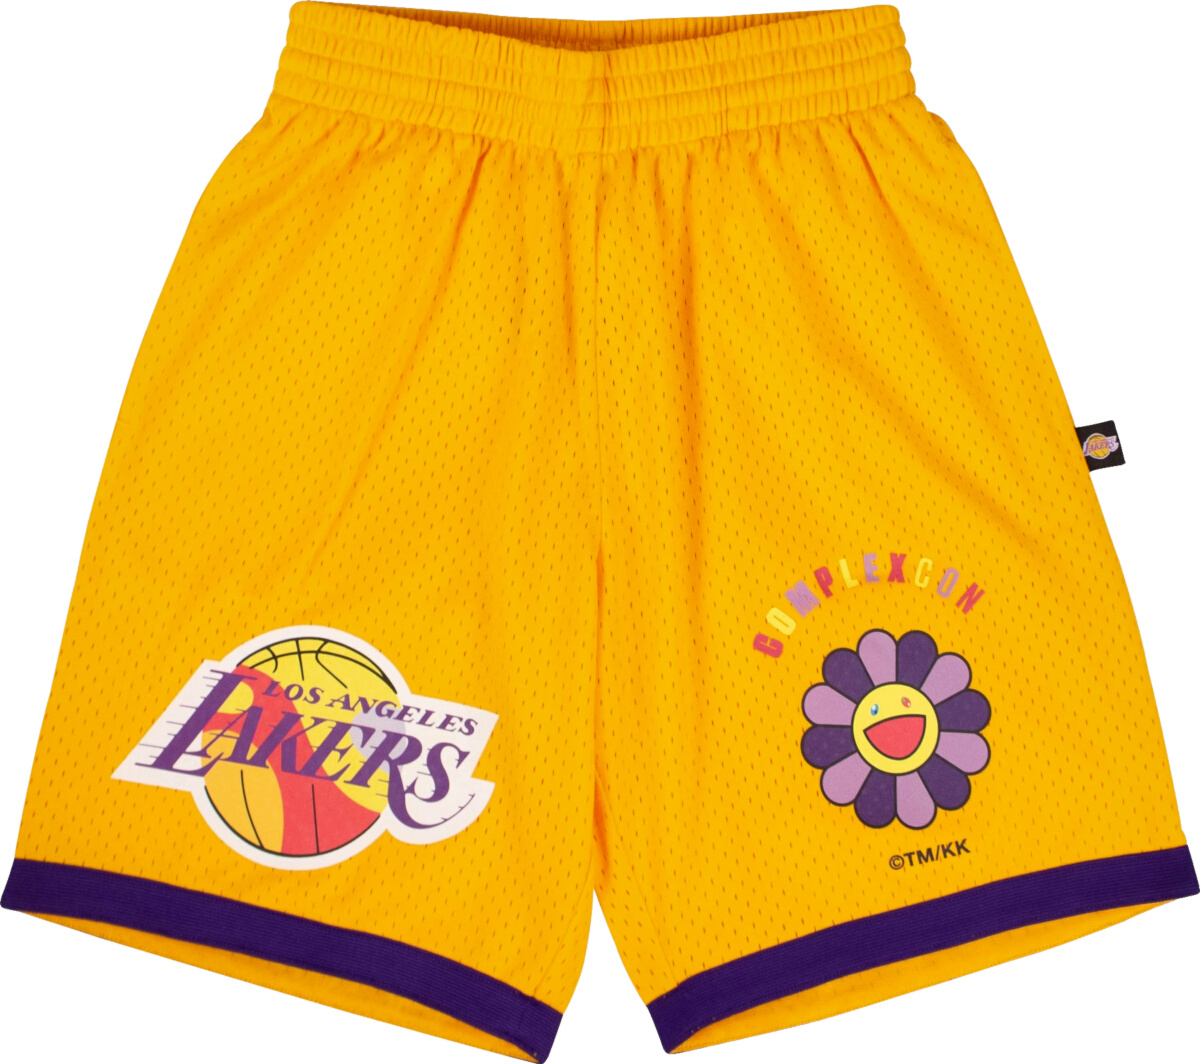 Takashi Murakami x ComplexCon Yellow L.A. Lakers Shorts | INC STYLE